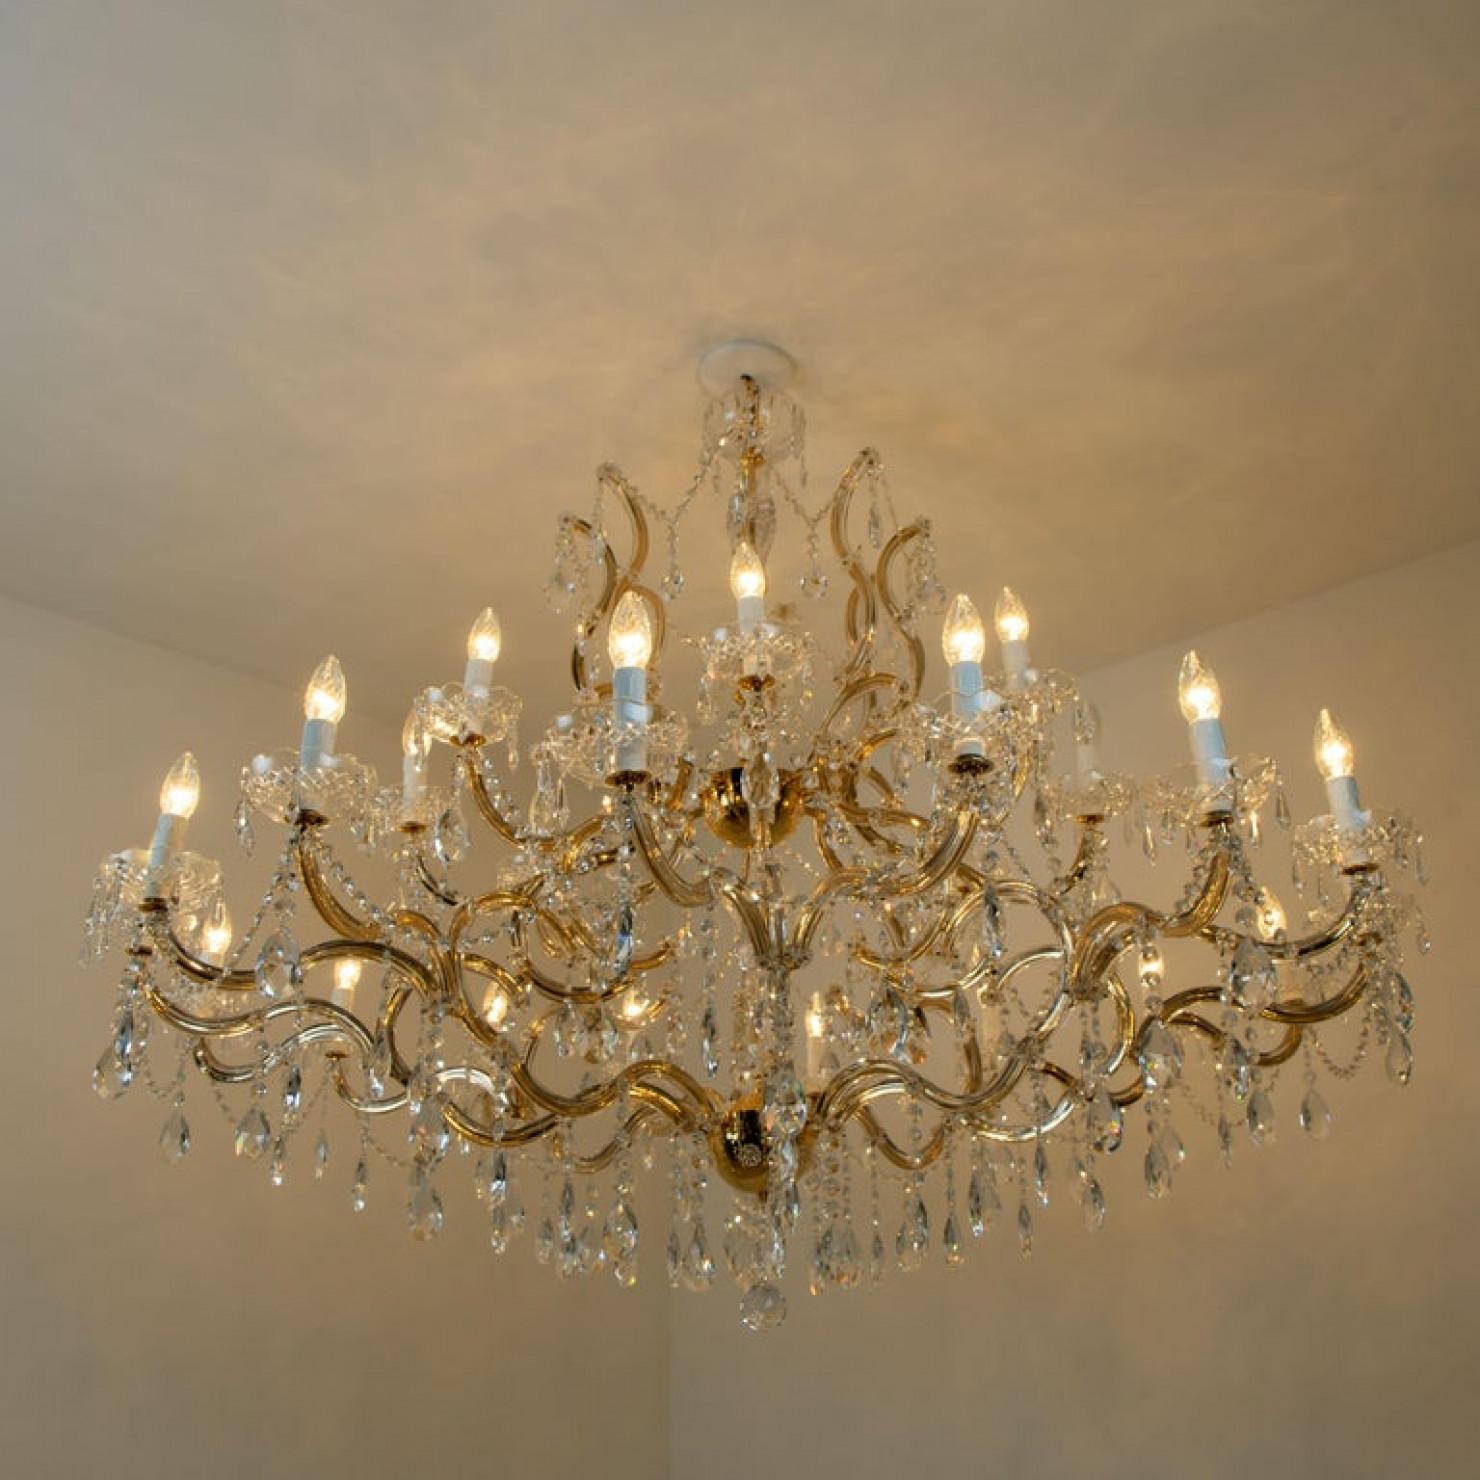 Huge High-End XXL Maria Theresa Gold Plated Swarovski Chandelier For Sale 9